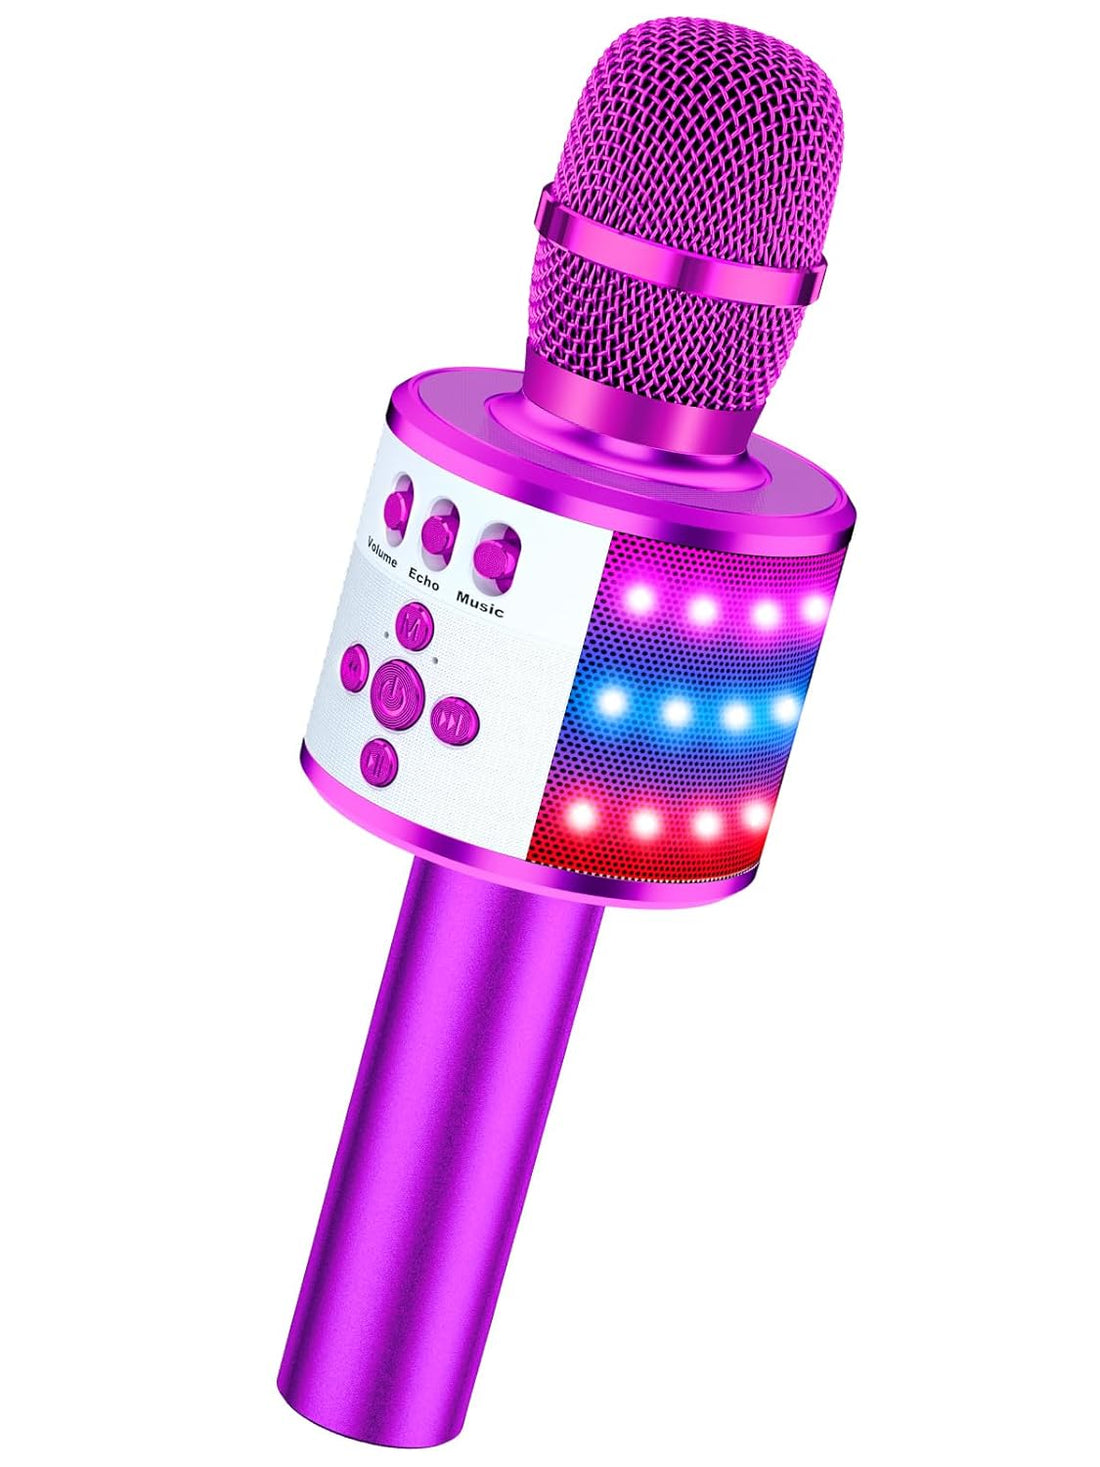 BONAOK Wireless Bluetooth Karaoke Microphone with Controllable LED Lights, Portable Handheld Karaoke Speaker Machine Birthday Home Party for All Smartphone (Q78 Purple)